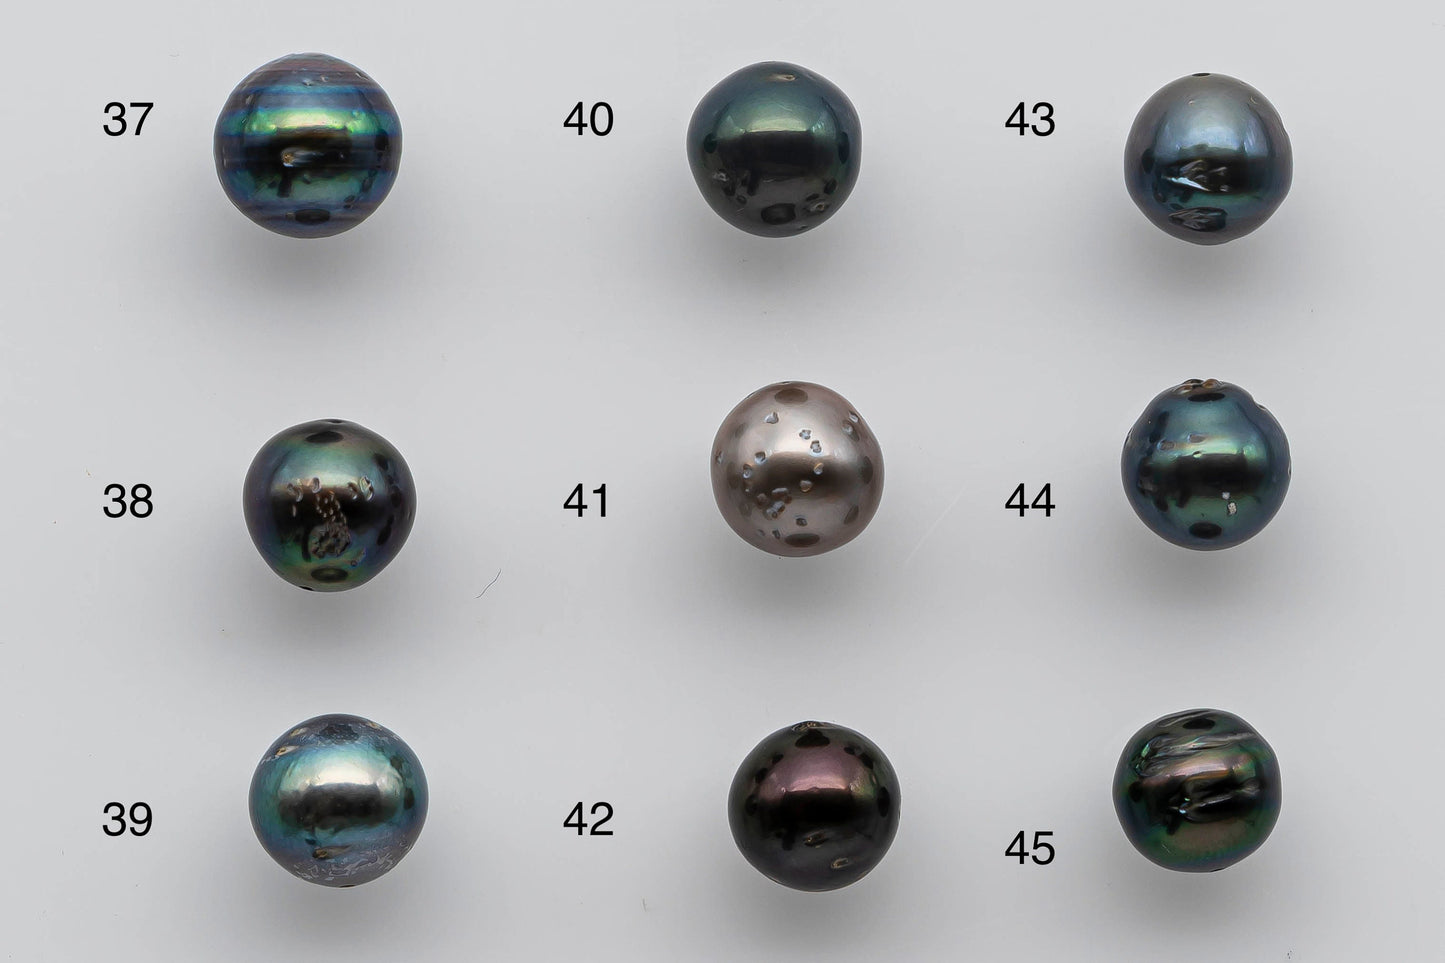 9-10mm Loose Tahitian Pearl Near Round Natural Colors and High Luster with Blemishes in Single Piece Predrilled Hole, SKU # 1382TH